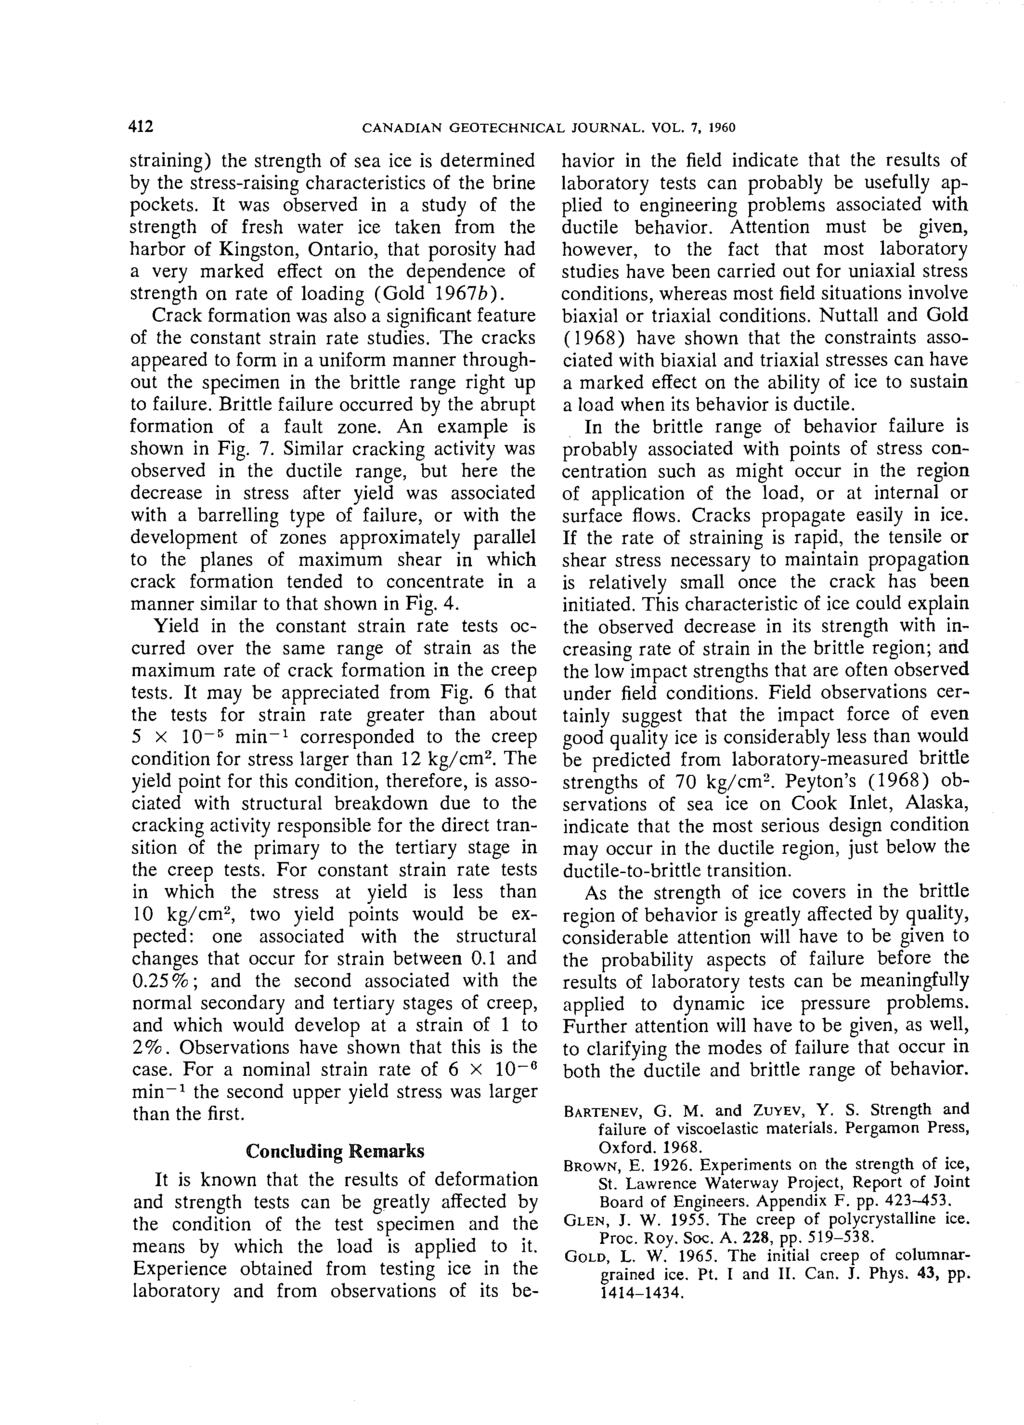 412 CANADIAN GEOTECHNICAL JOURNAL. VOL. 7, 1960 straining) the strength of sea ice is determined by the stress-raising characteristics of the brine pockets.